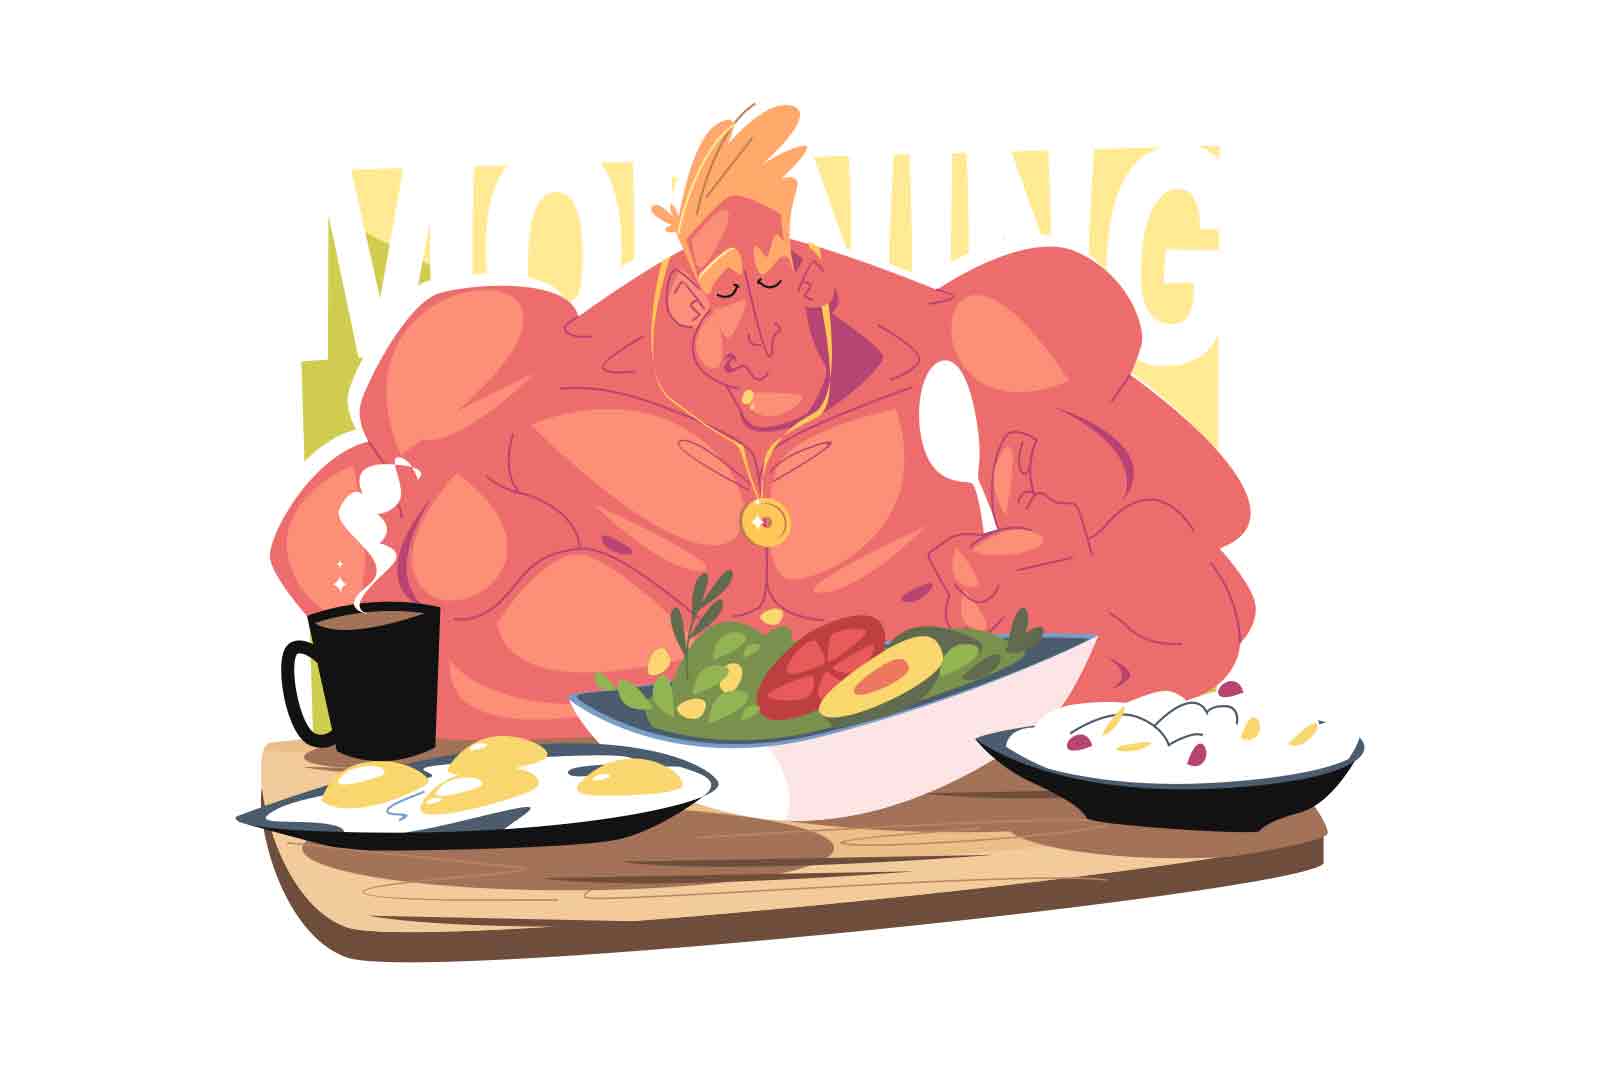 Athlete having breakfast vector illustration. Man sitting at table and having morning meal flat style concept. Healthy food idea